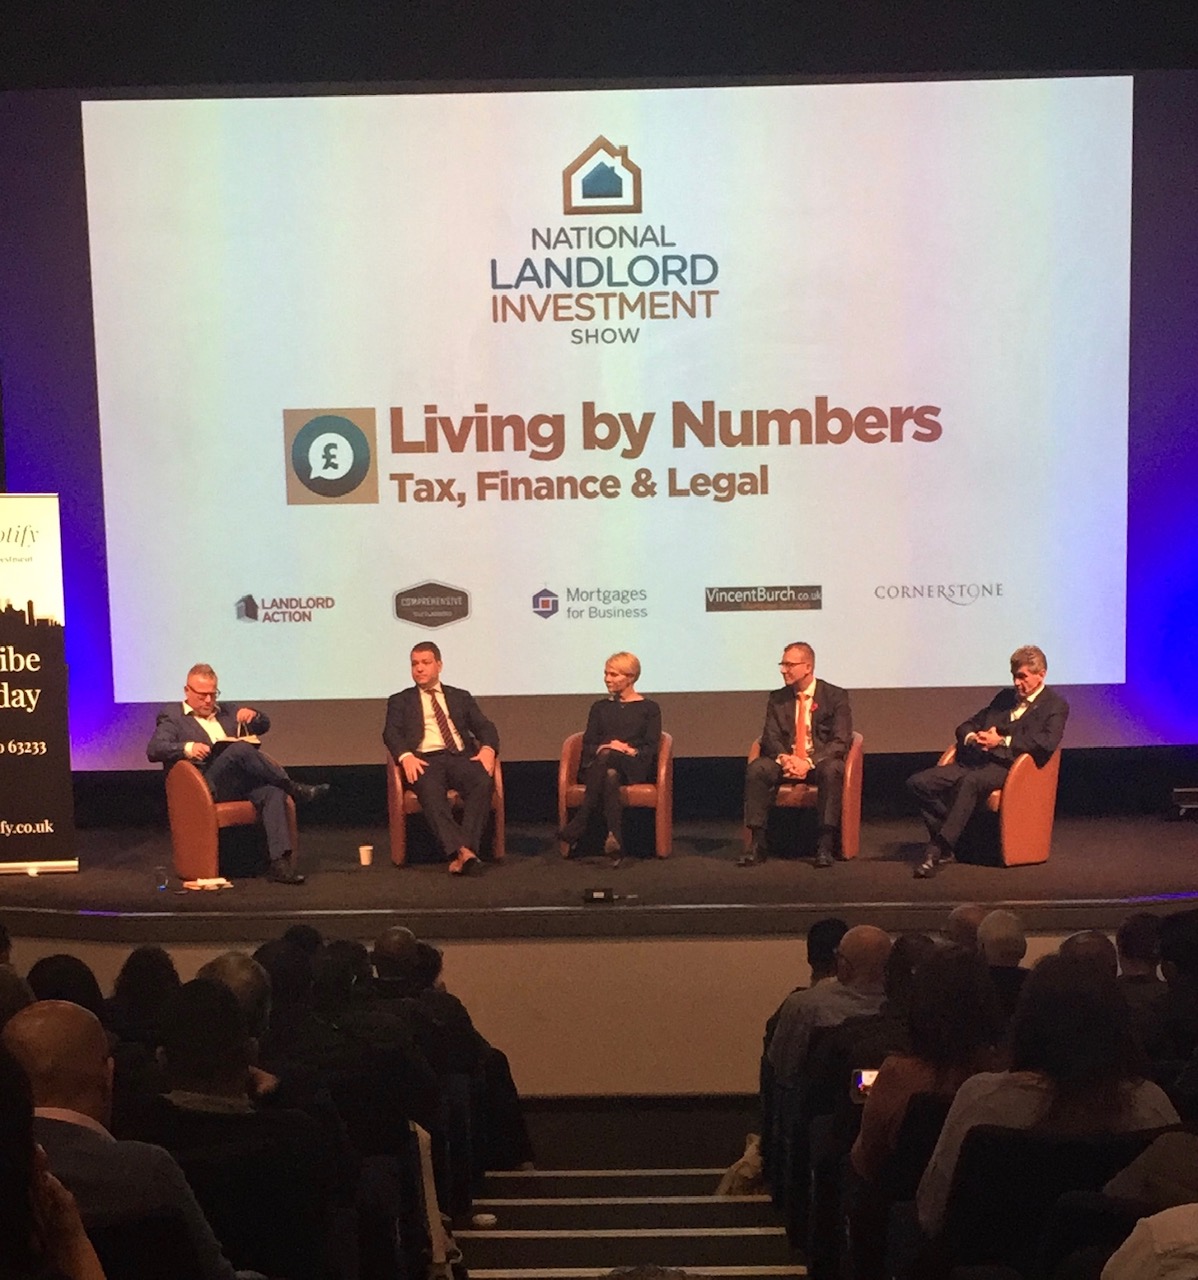 Landlord Investment Show – ‘Living by numbers’ panel debate: the key takeaways - https://roomslocal.co.uk/blog/landlord-investment-show-living-by-numbers-panel-debate-the-key-takeaways #investment #show #living #numbers #panel